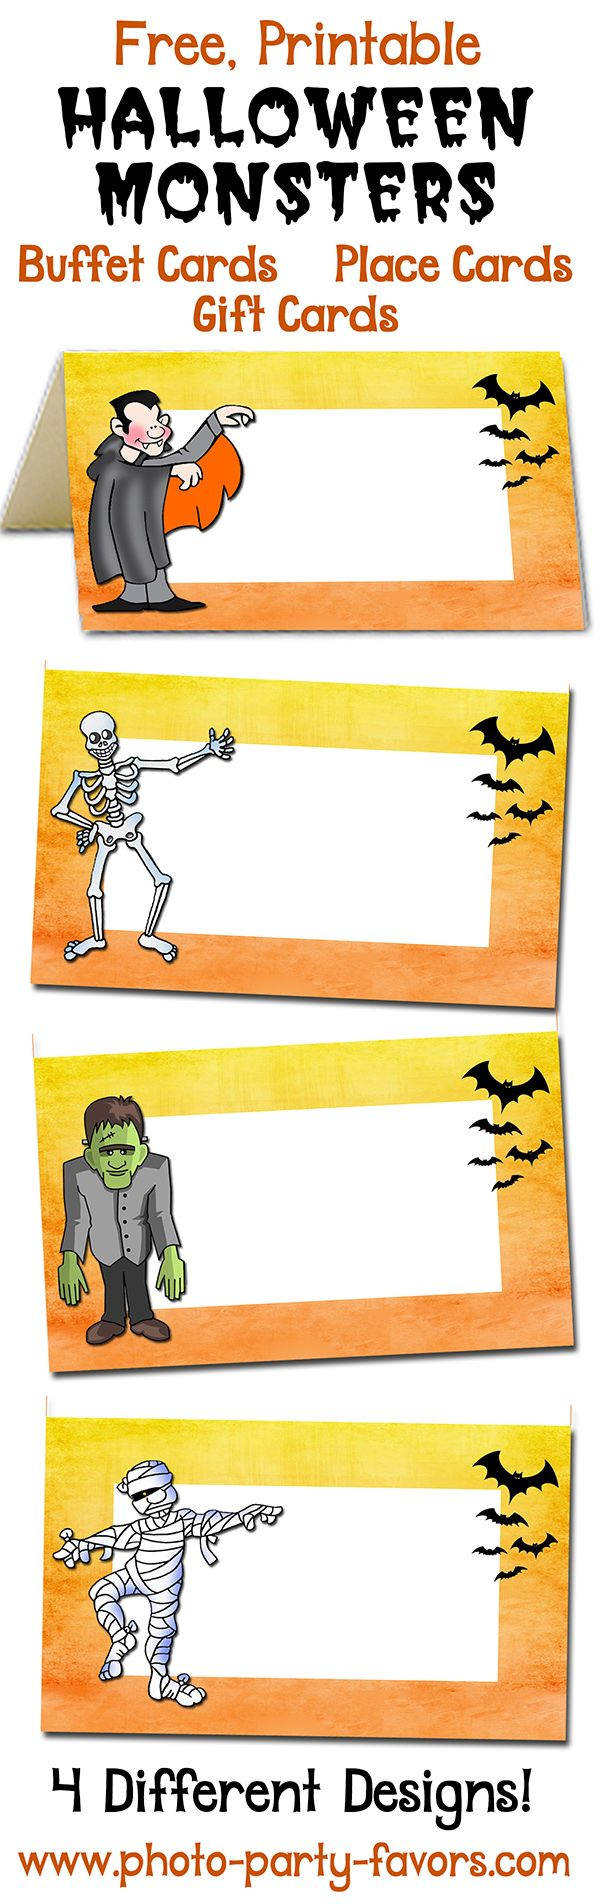 Free Printable Monsters Halloween Buffet Cards - Label Your Scarey for Free Printable Halloween Place Cards